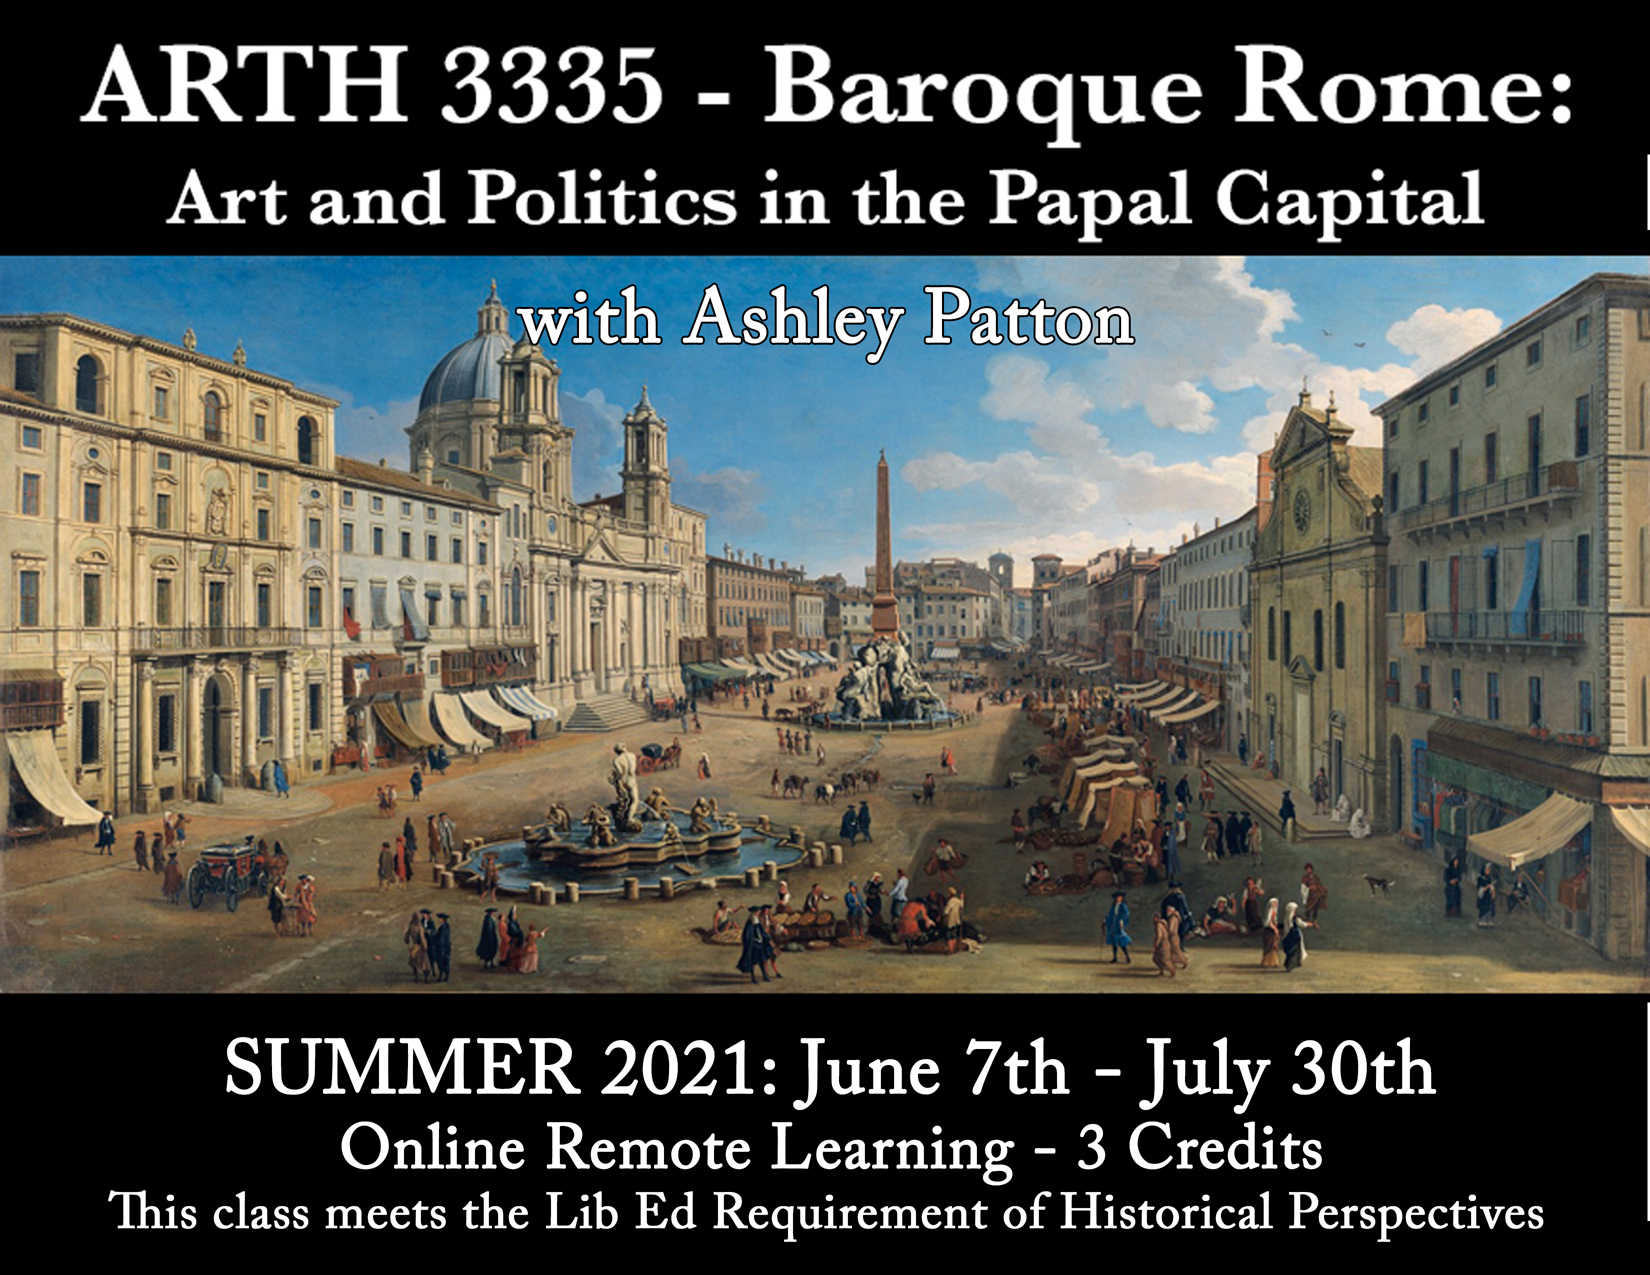 Course poster for ARTH 3335 showing the city of Rome and the class details.